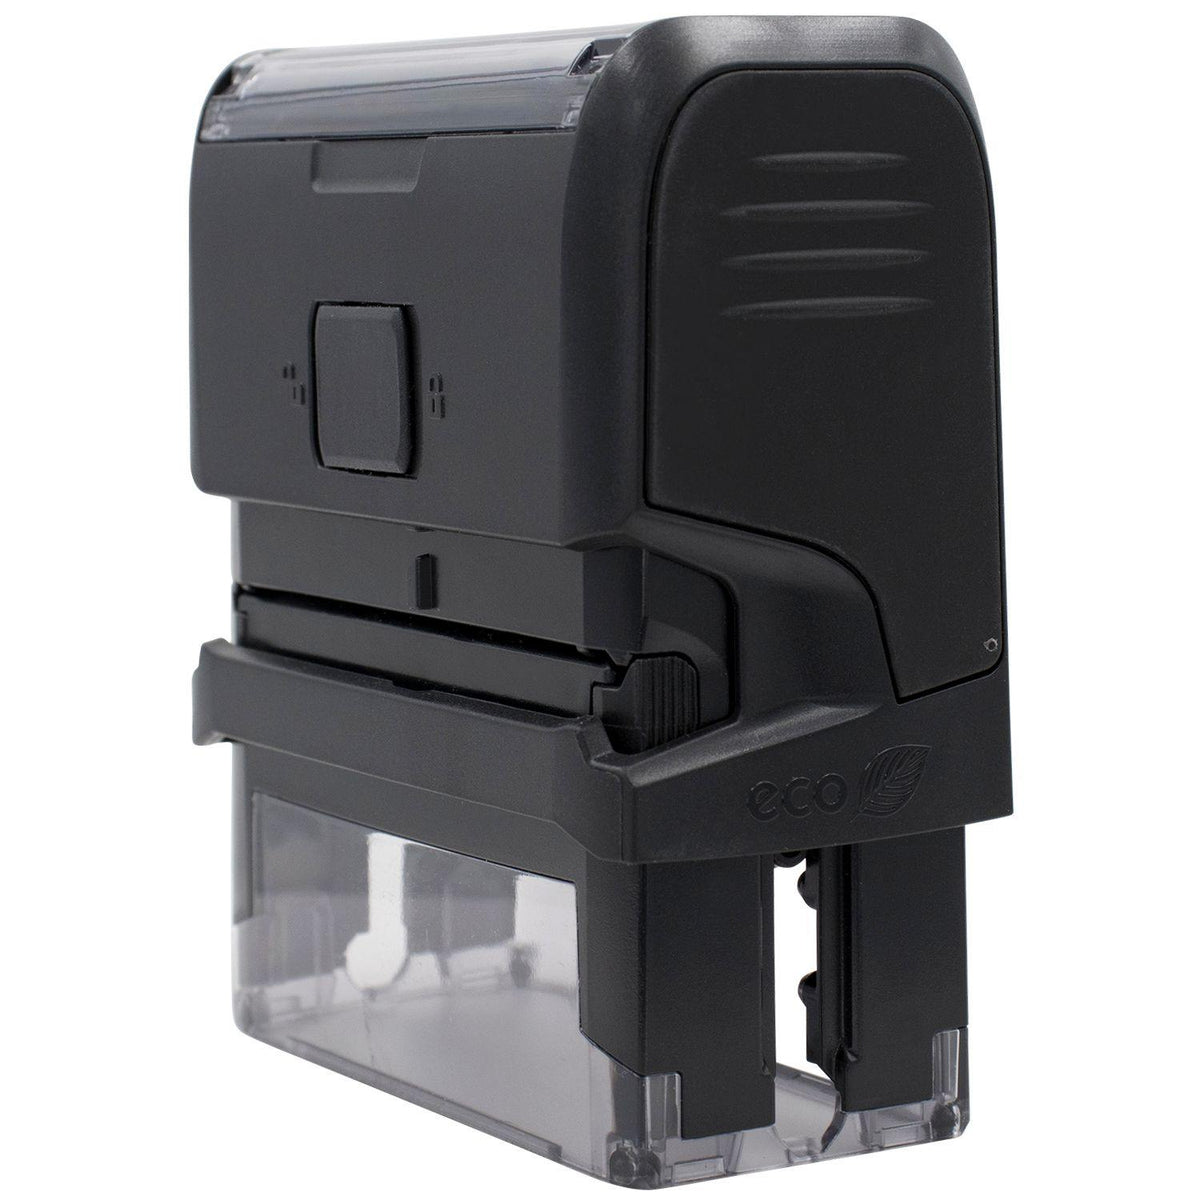 Self-Inking Small Packet Stamp - Engineer Seal Stamps - Brand_Trodat, Impression Size_Small, Stamp Type_Self-Inking Stamp, Type of Use_Postal &amp; Mailing, Type of Use_Shipping &amp; Receiving